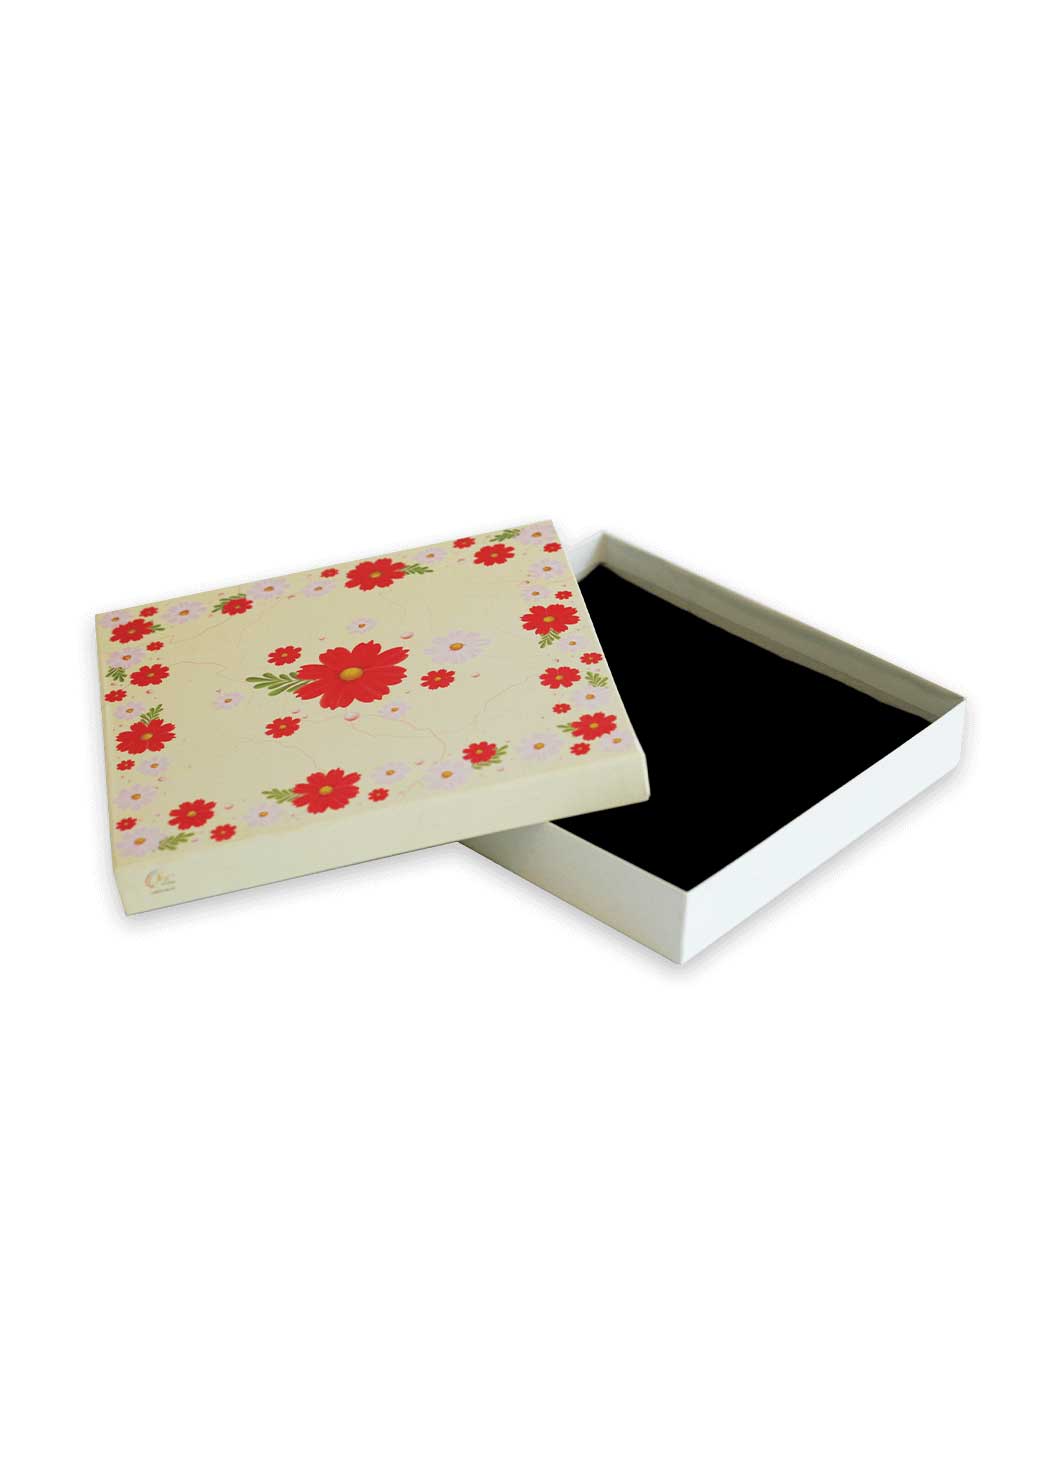 Off White Floral Design Box for Packing